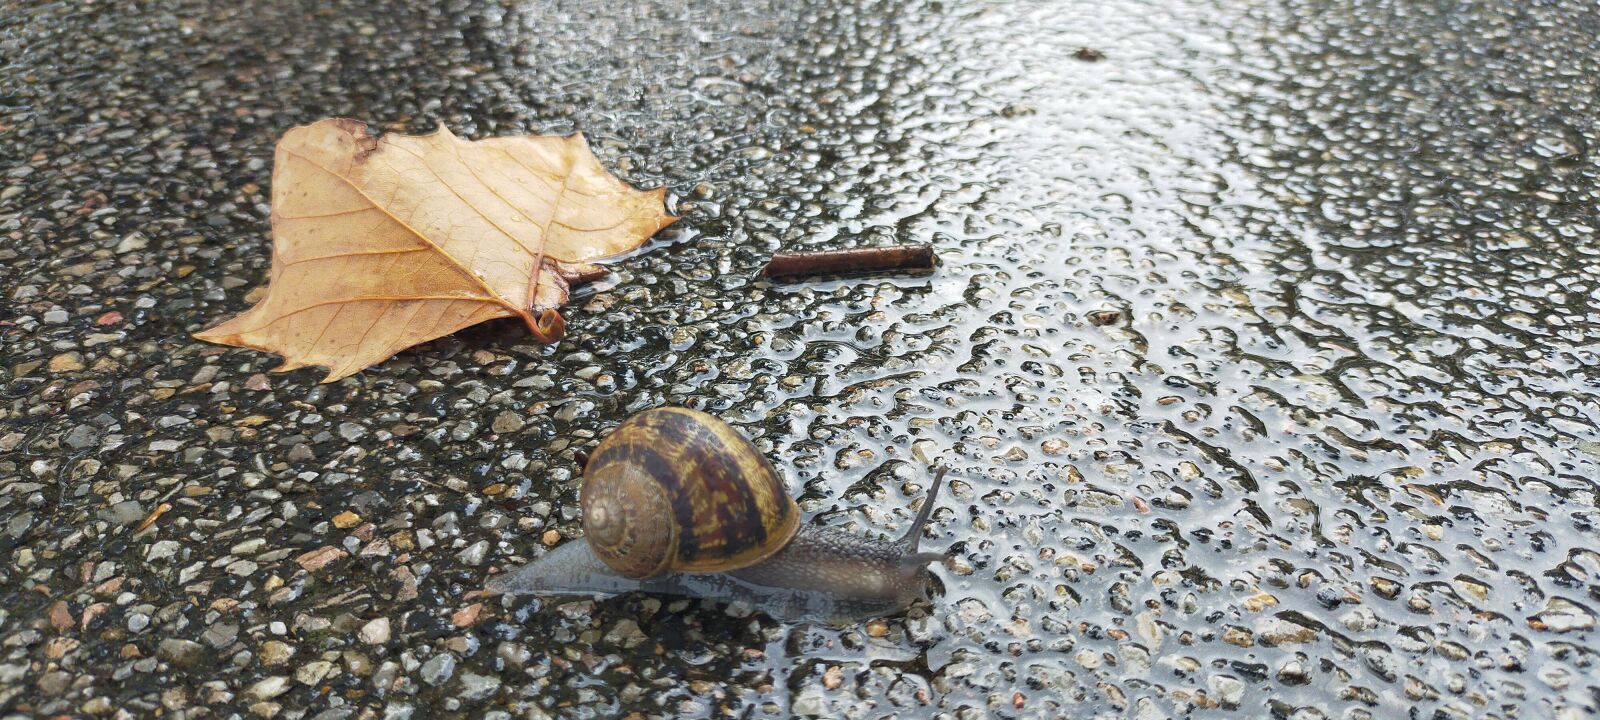 OPPO A9 2020 sample photo. Snail, animal, nature photography